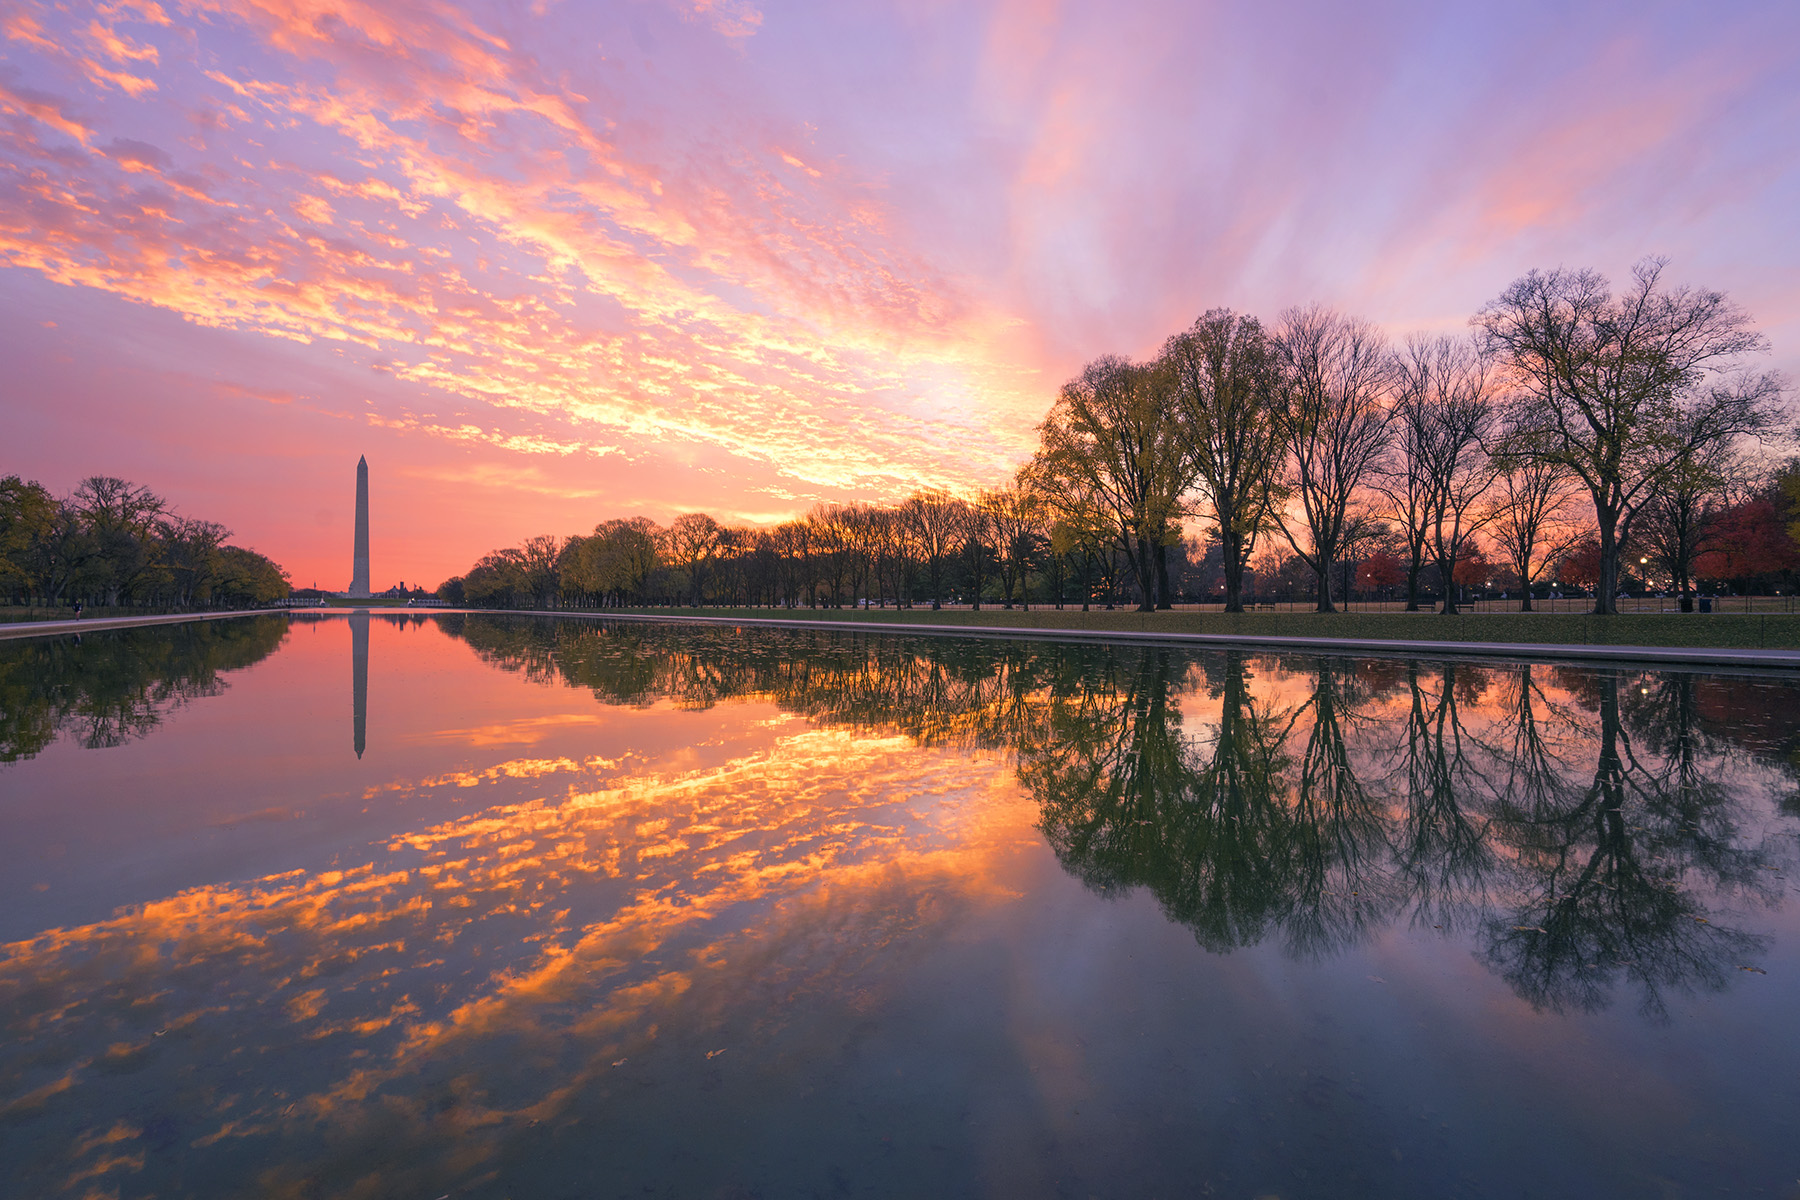 7 Magical Sunrise Spots To Photograph In Washington Dc [2019 Update]